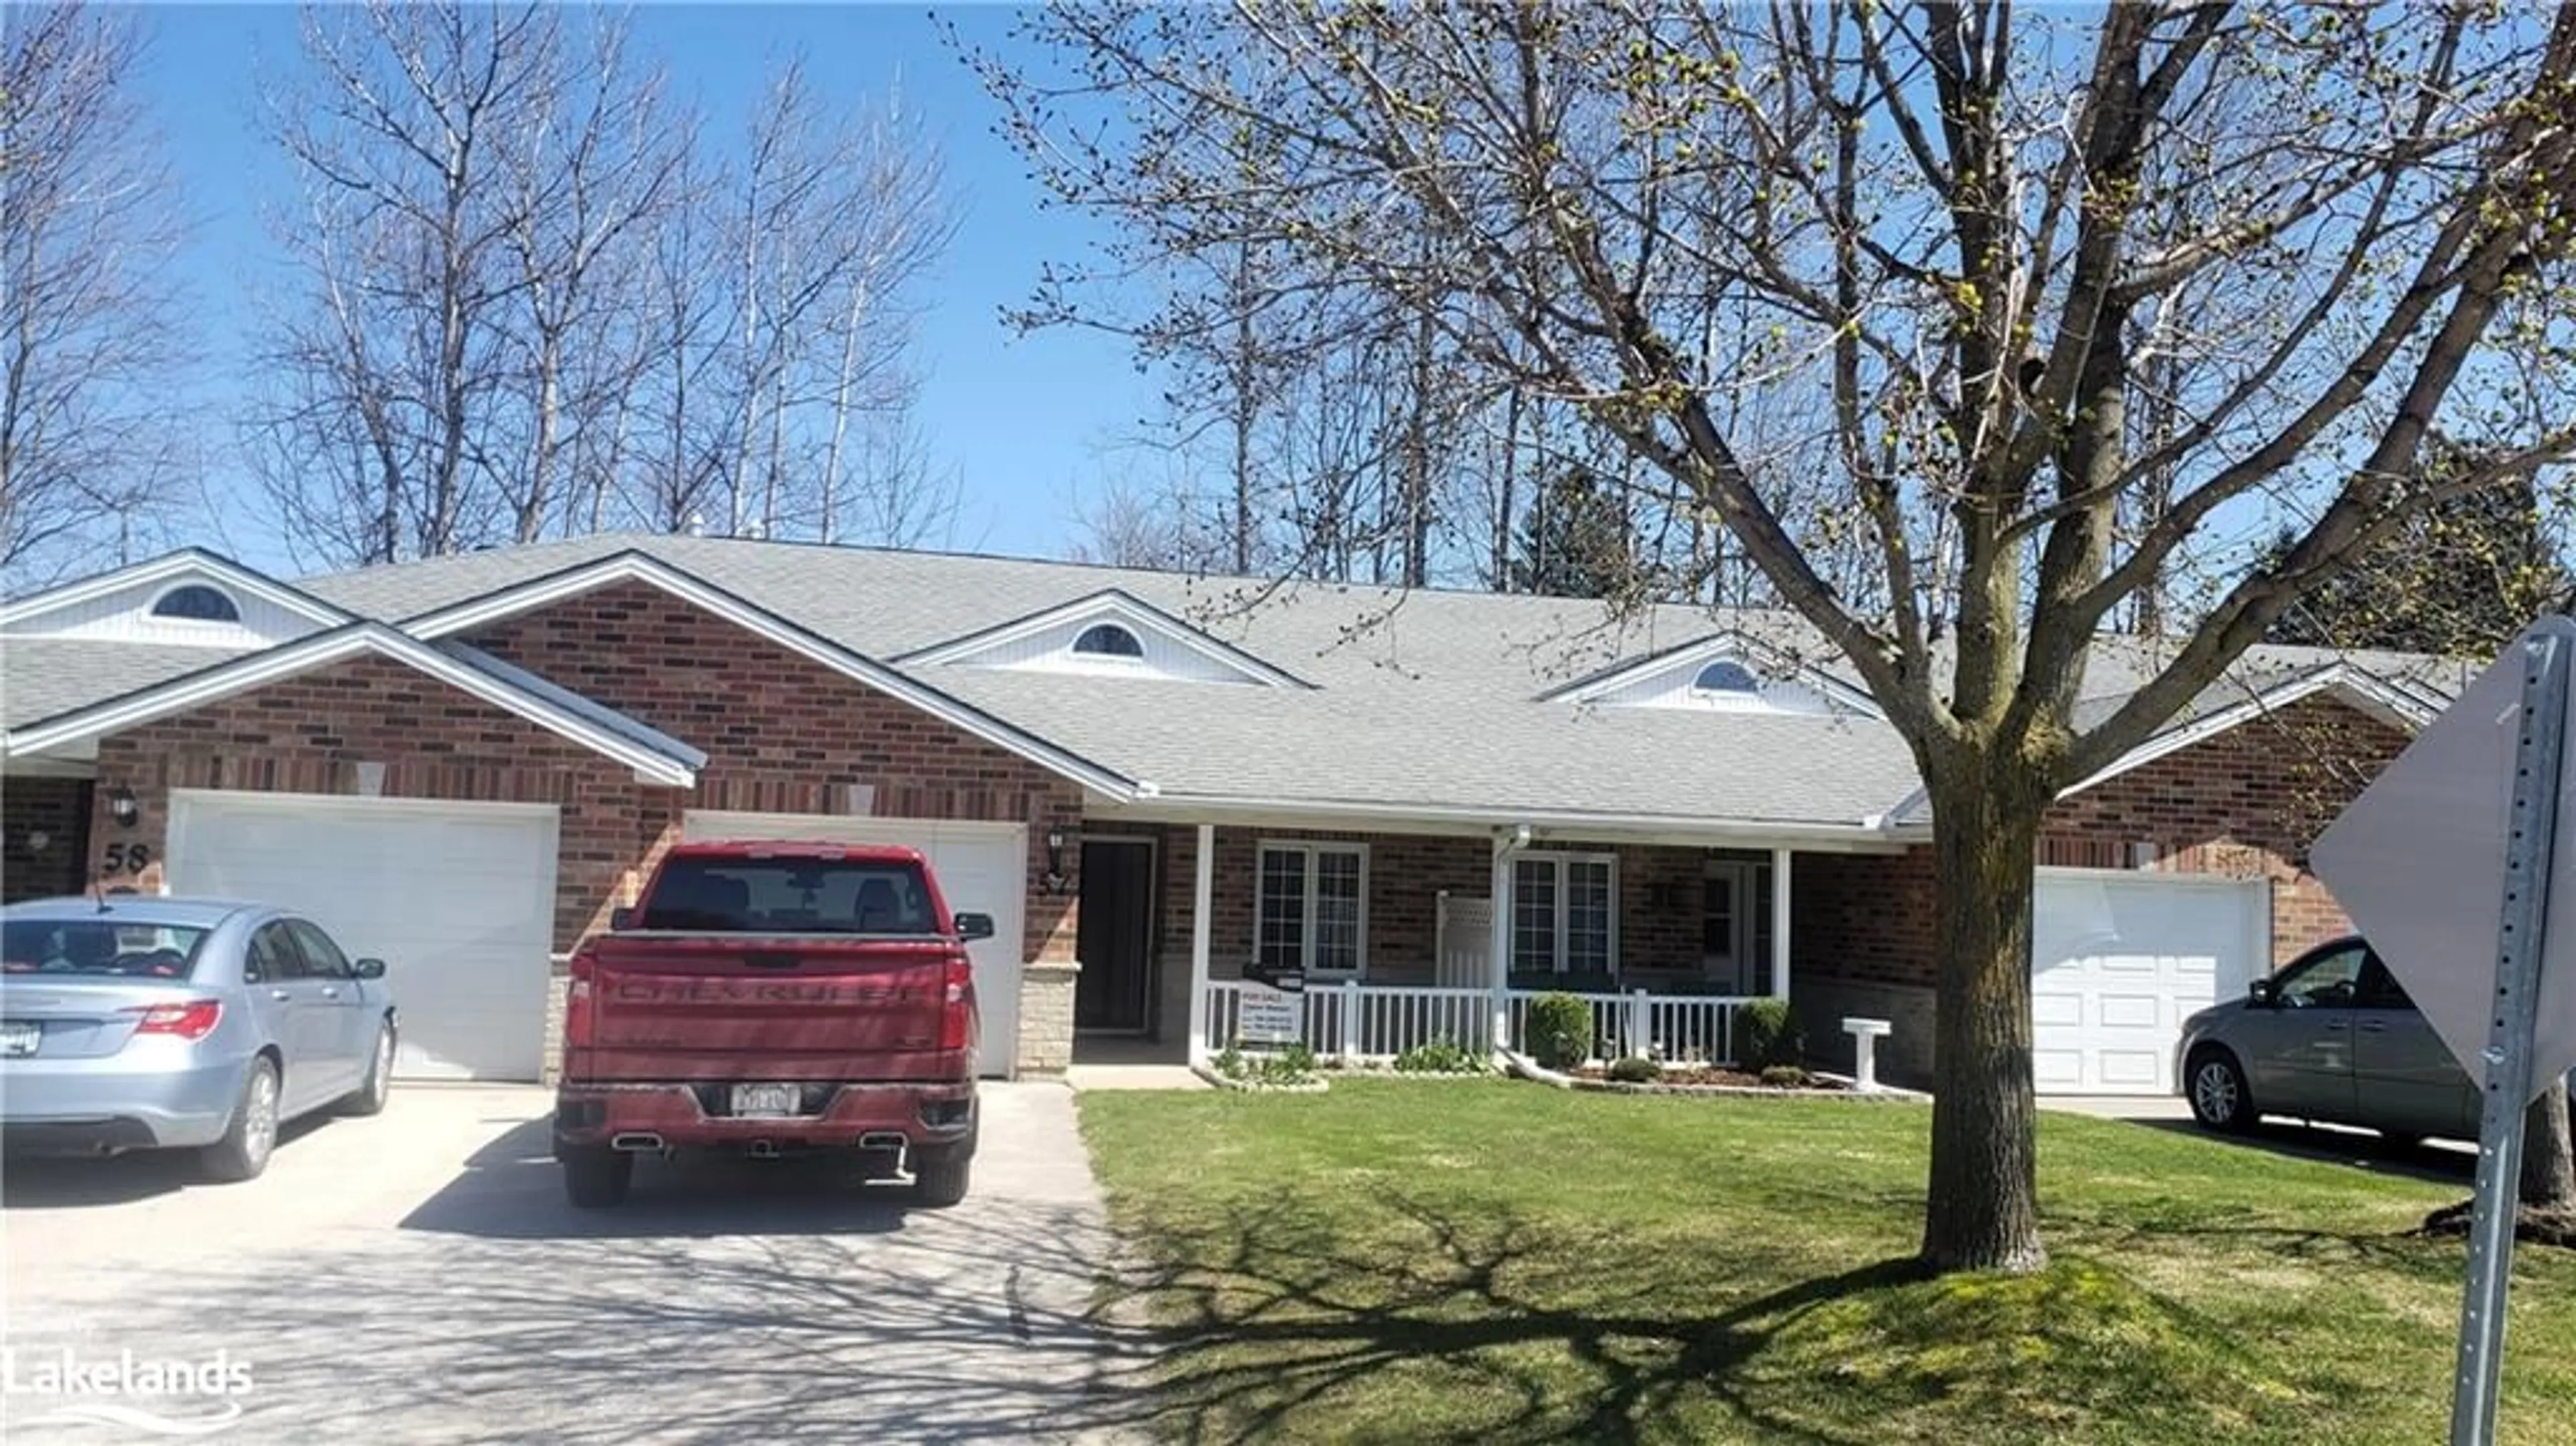 Frontside or backside of a home for 275 Huron St #57, Stayner Ontario L0M 1S0